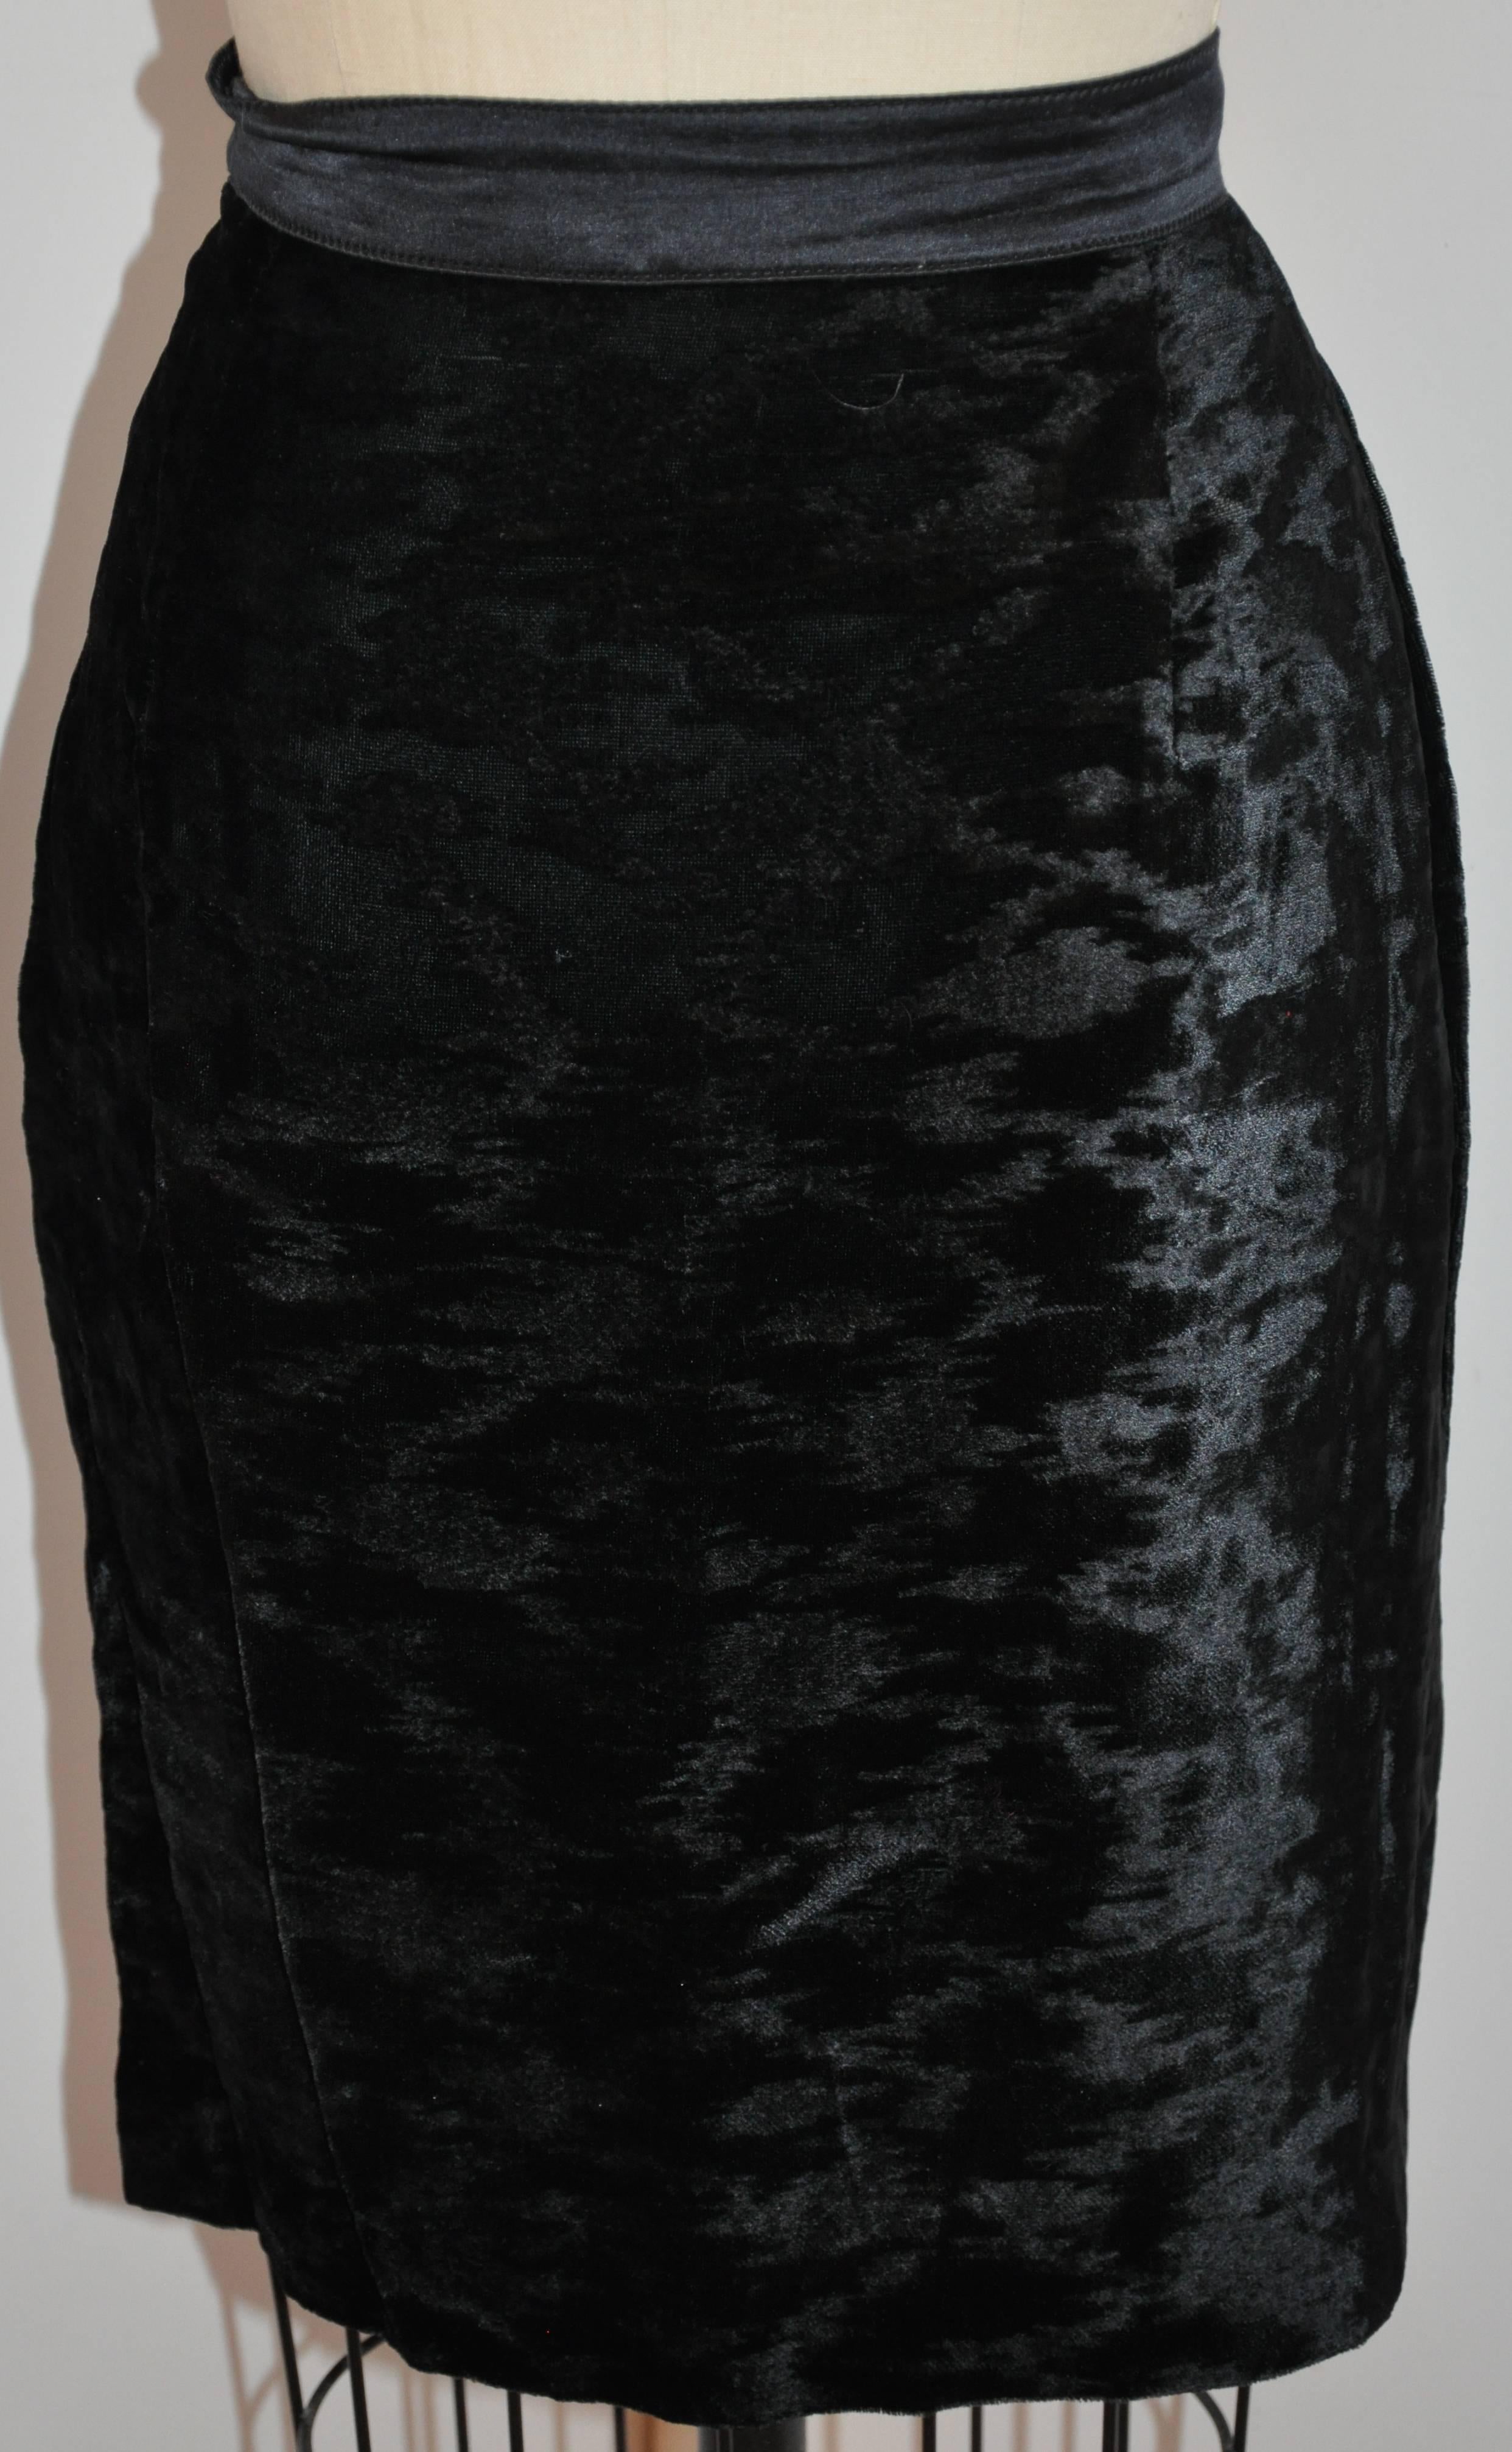      Escada by Margaretha Ley elegant fully lined jet-black fully lined crushed velvet pencil skirt is accented with a silk-satin waistband. The invisible side zipper measures 7 1/4 inches in length. The waistband measures 1 1/2 inches, waist